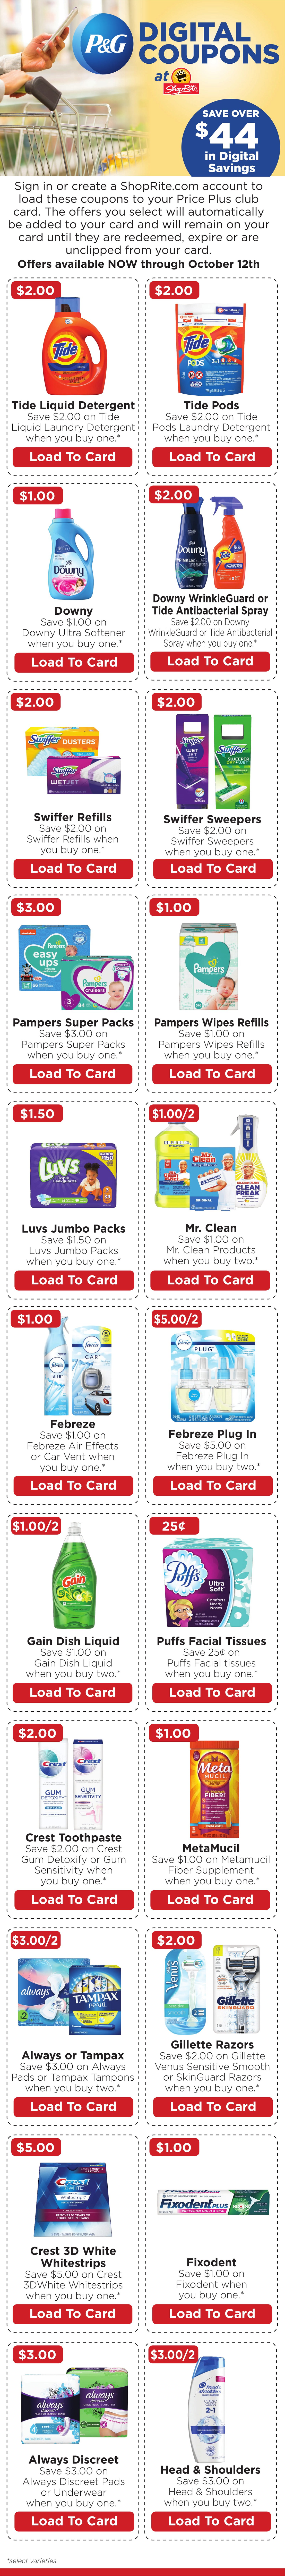 P G Everyday Save Over 40 This Week With Digital Coupons Milled